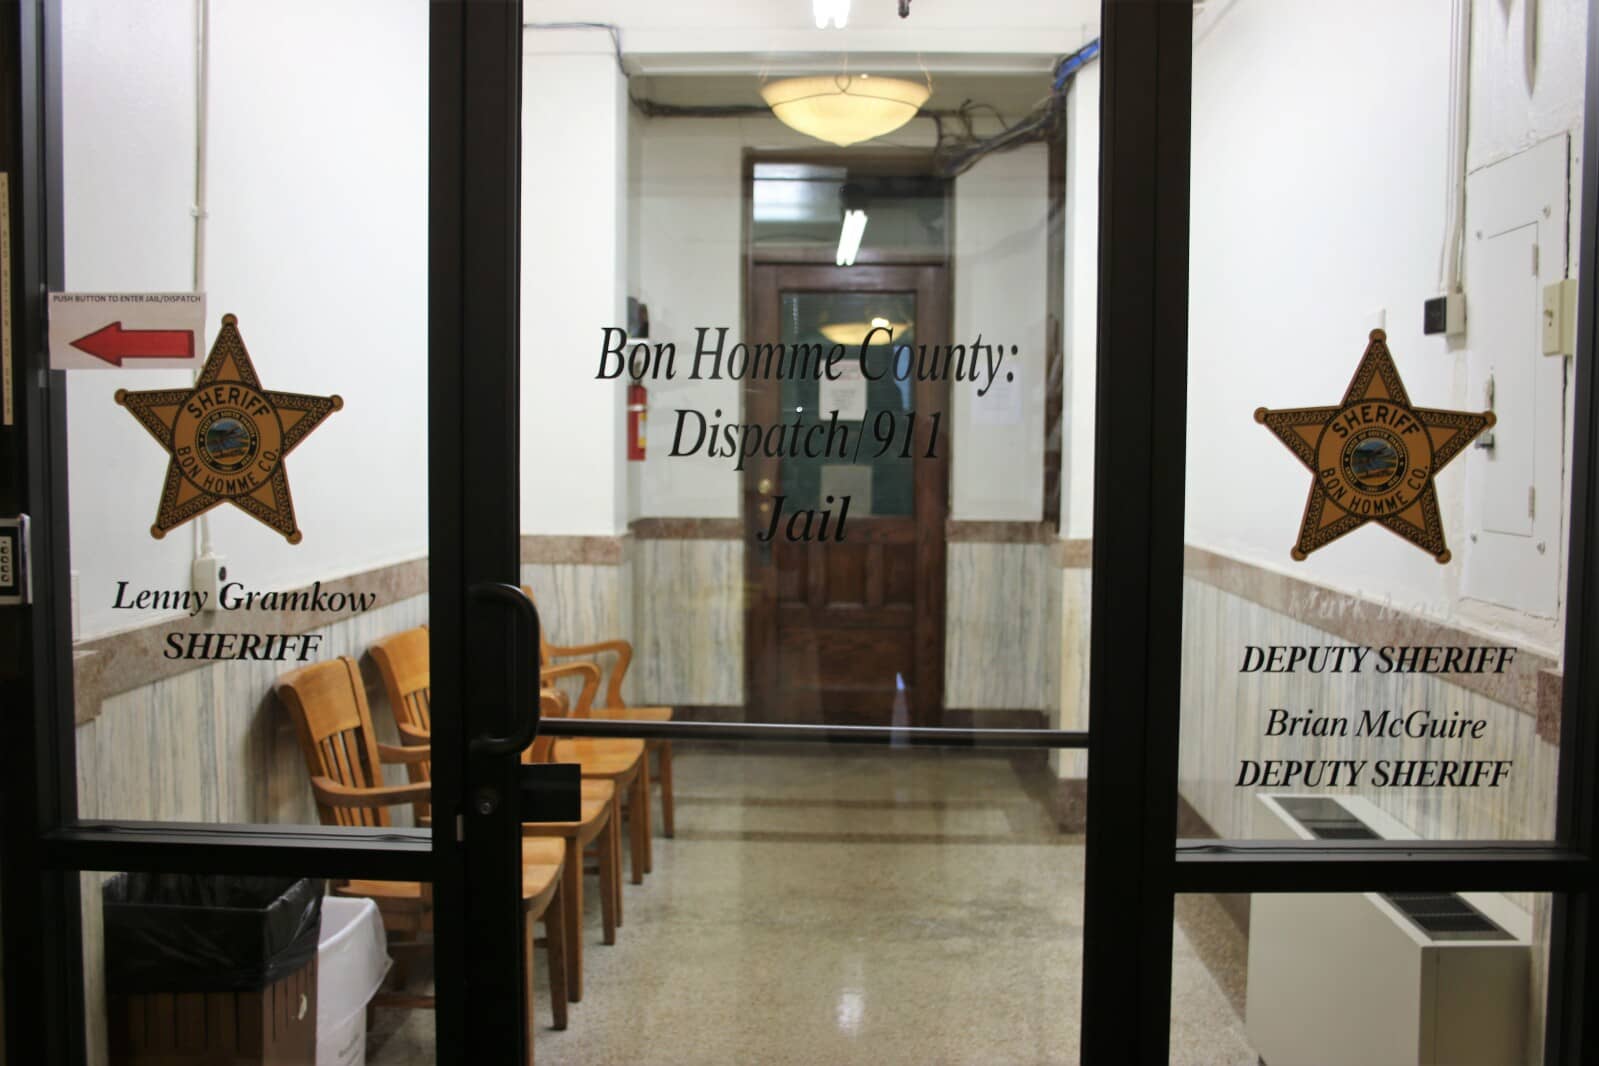 Image of Bon Homme County Sheriffs Office / Bon Homme County Jail